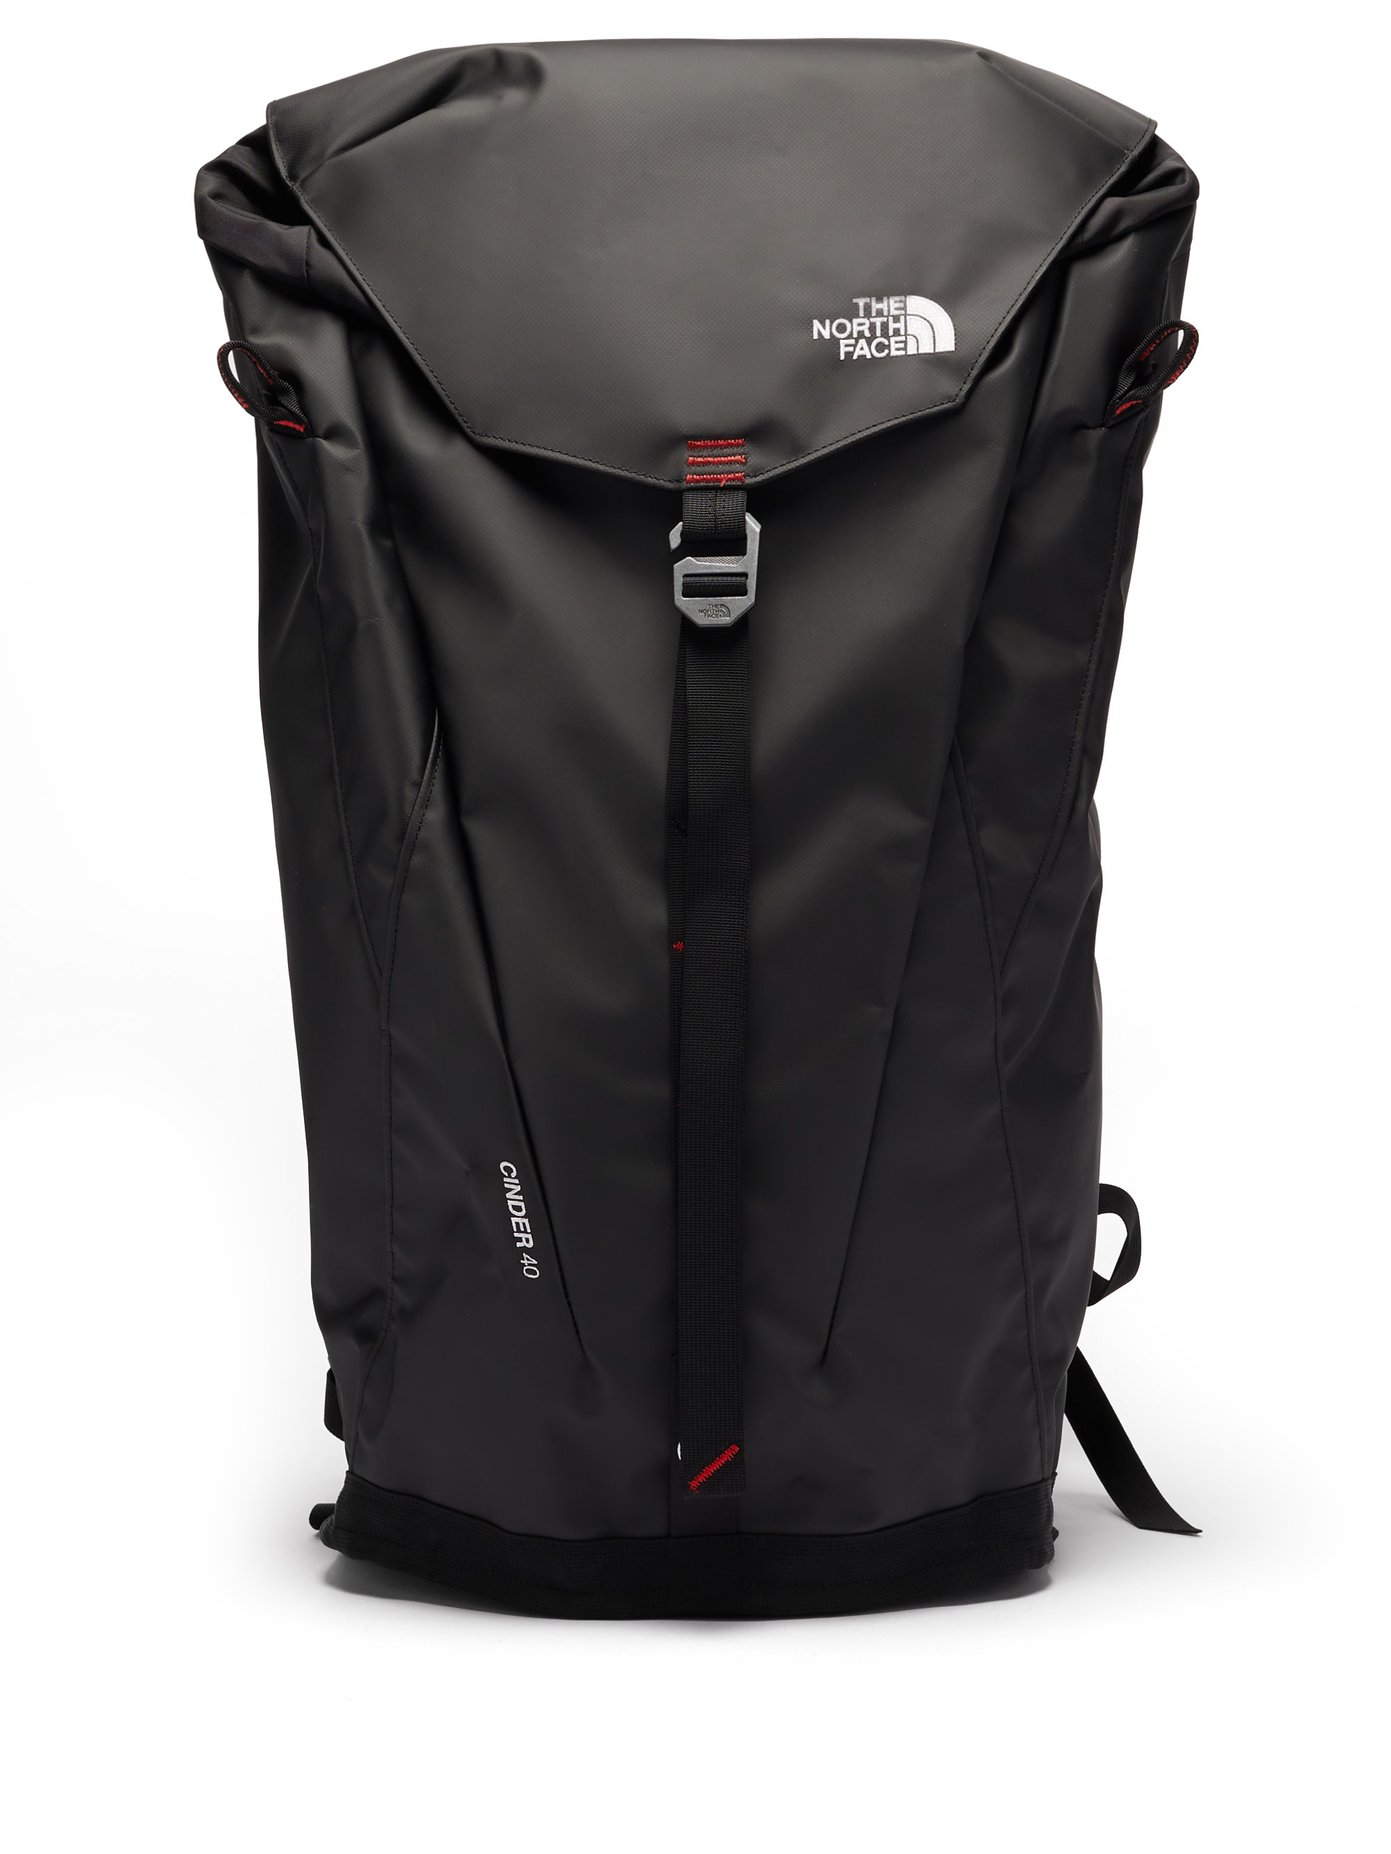 the north face cinder 40